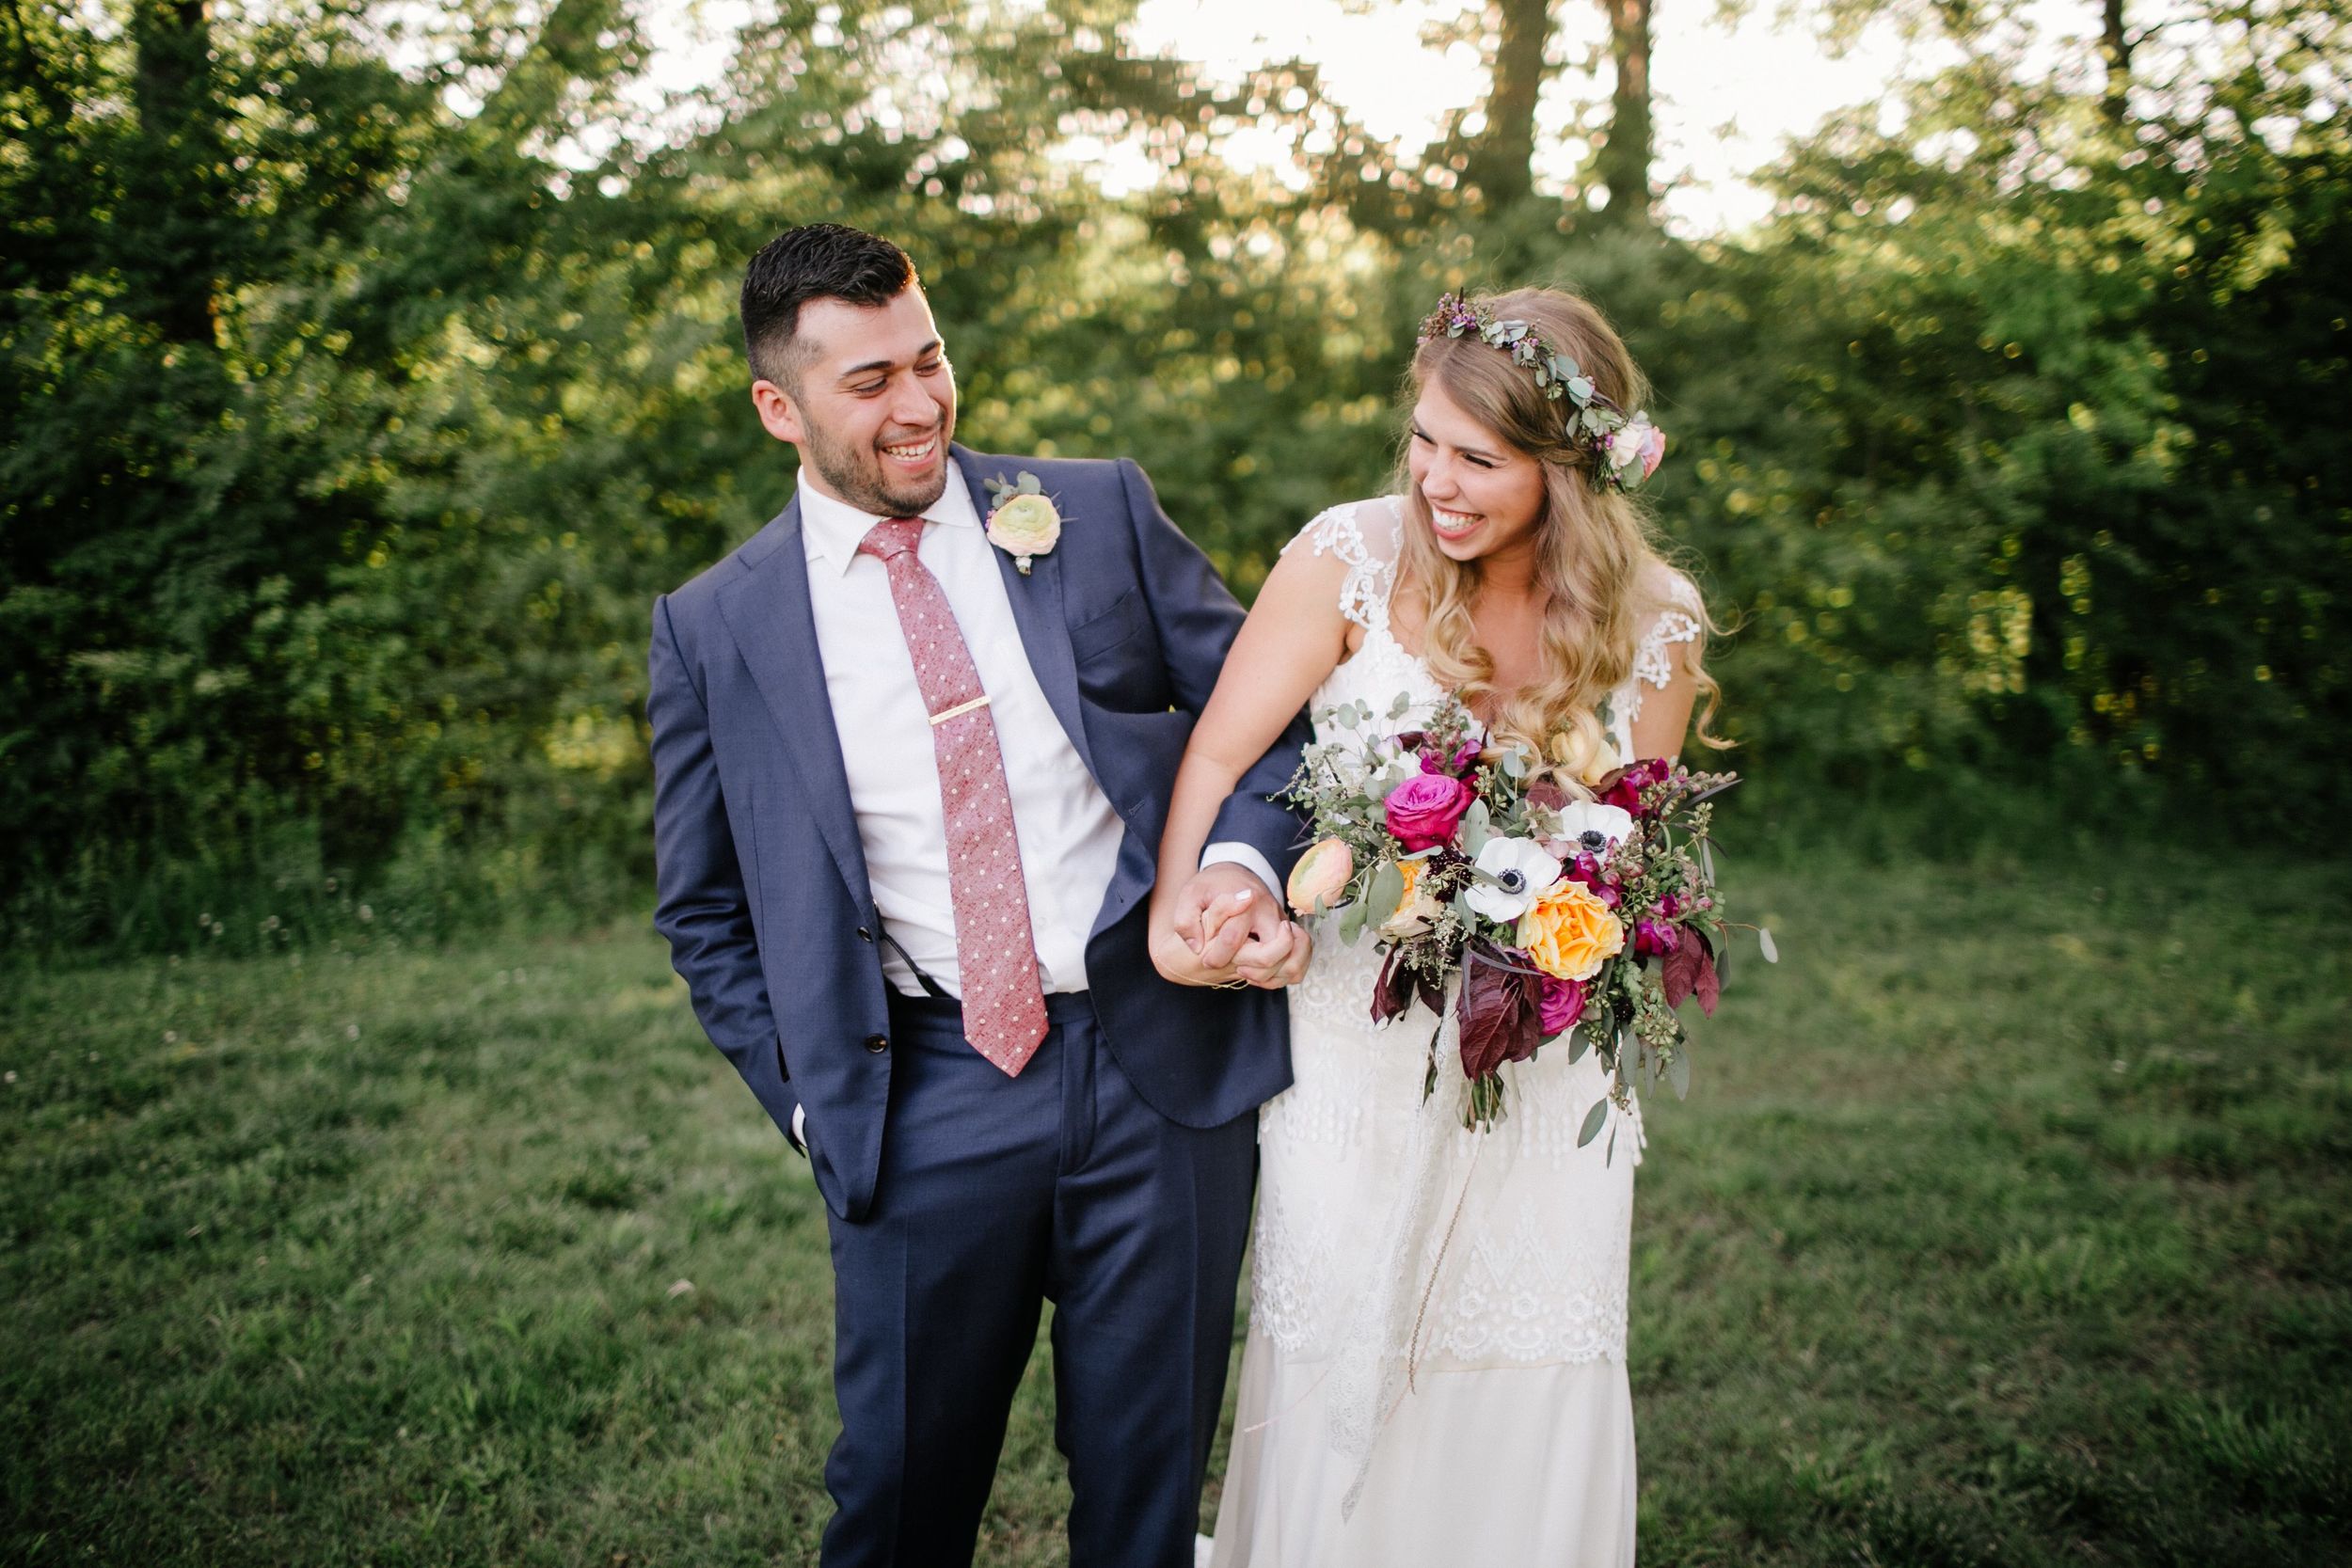 Bohemian Fiesta Bride and Groom // Nashville Wedding Florist with natural, loose style